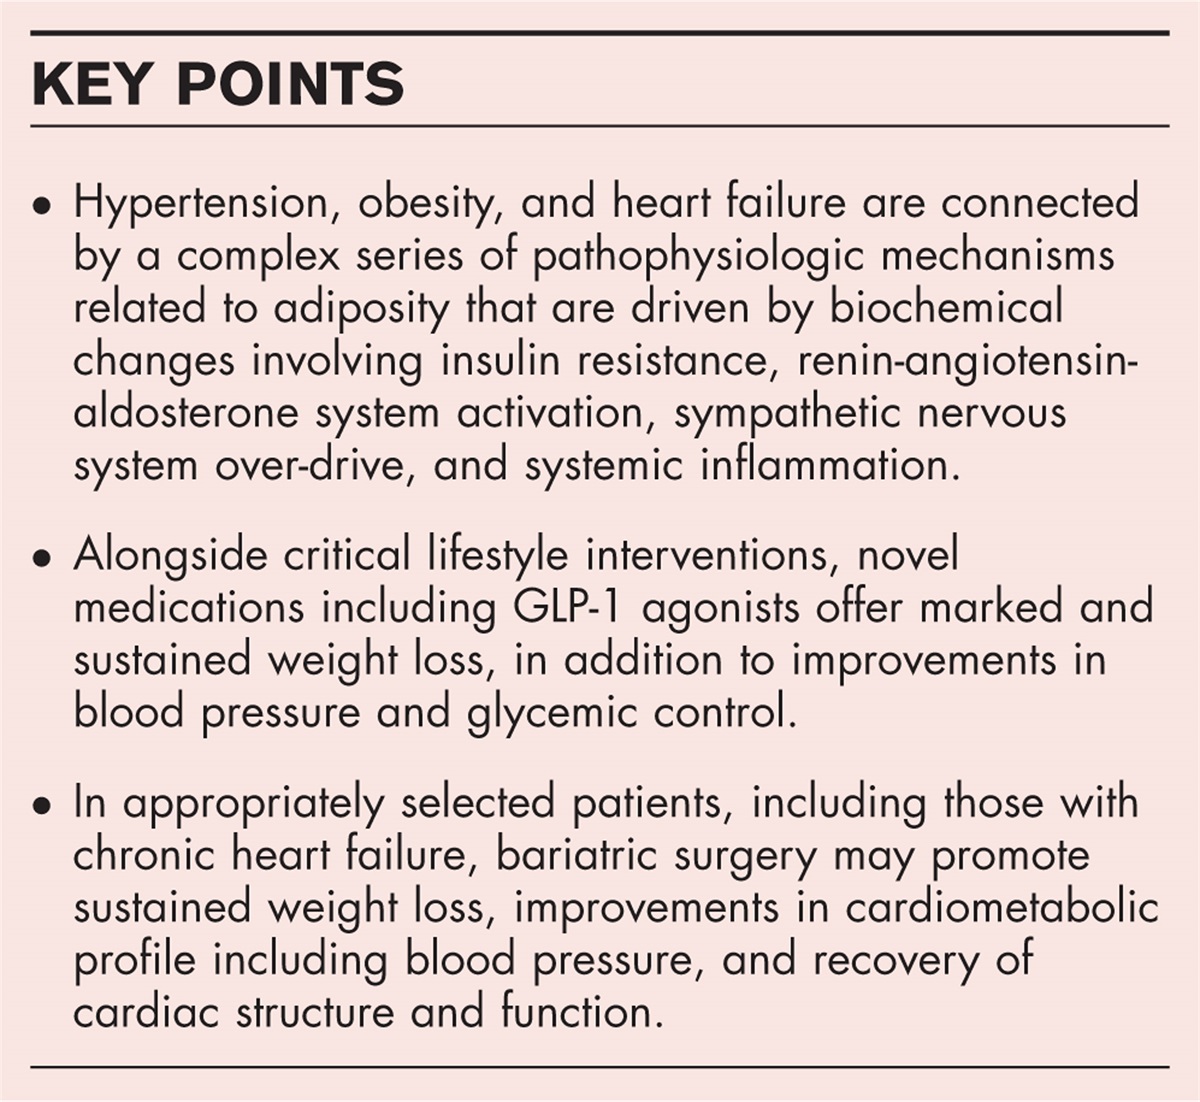 Clinical considerations and pathophysiological associations among obesity, weight loss, heart failure, and hypertension